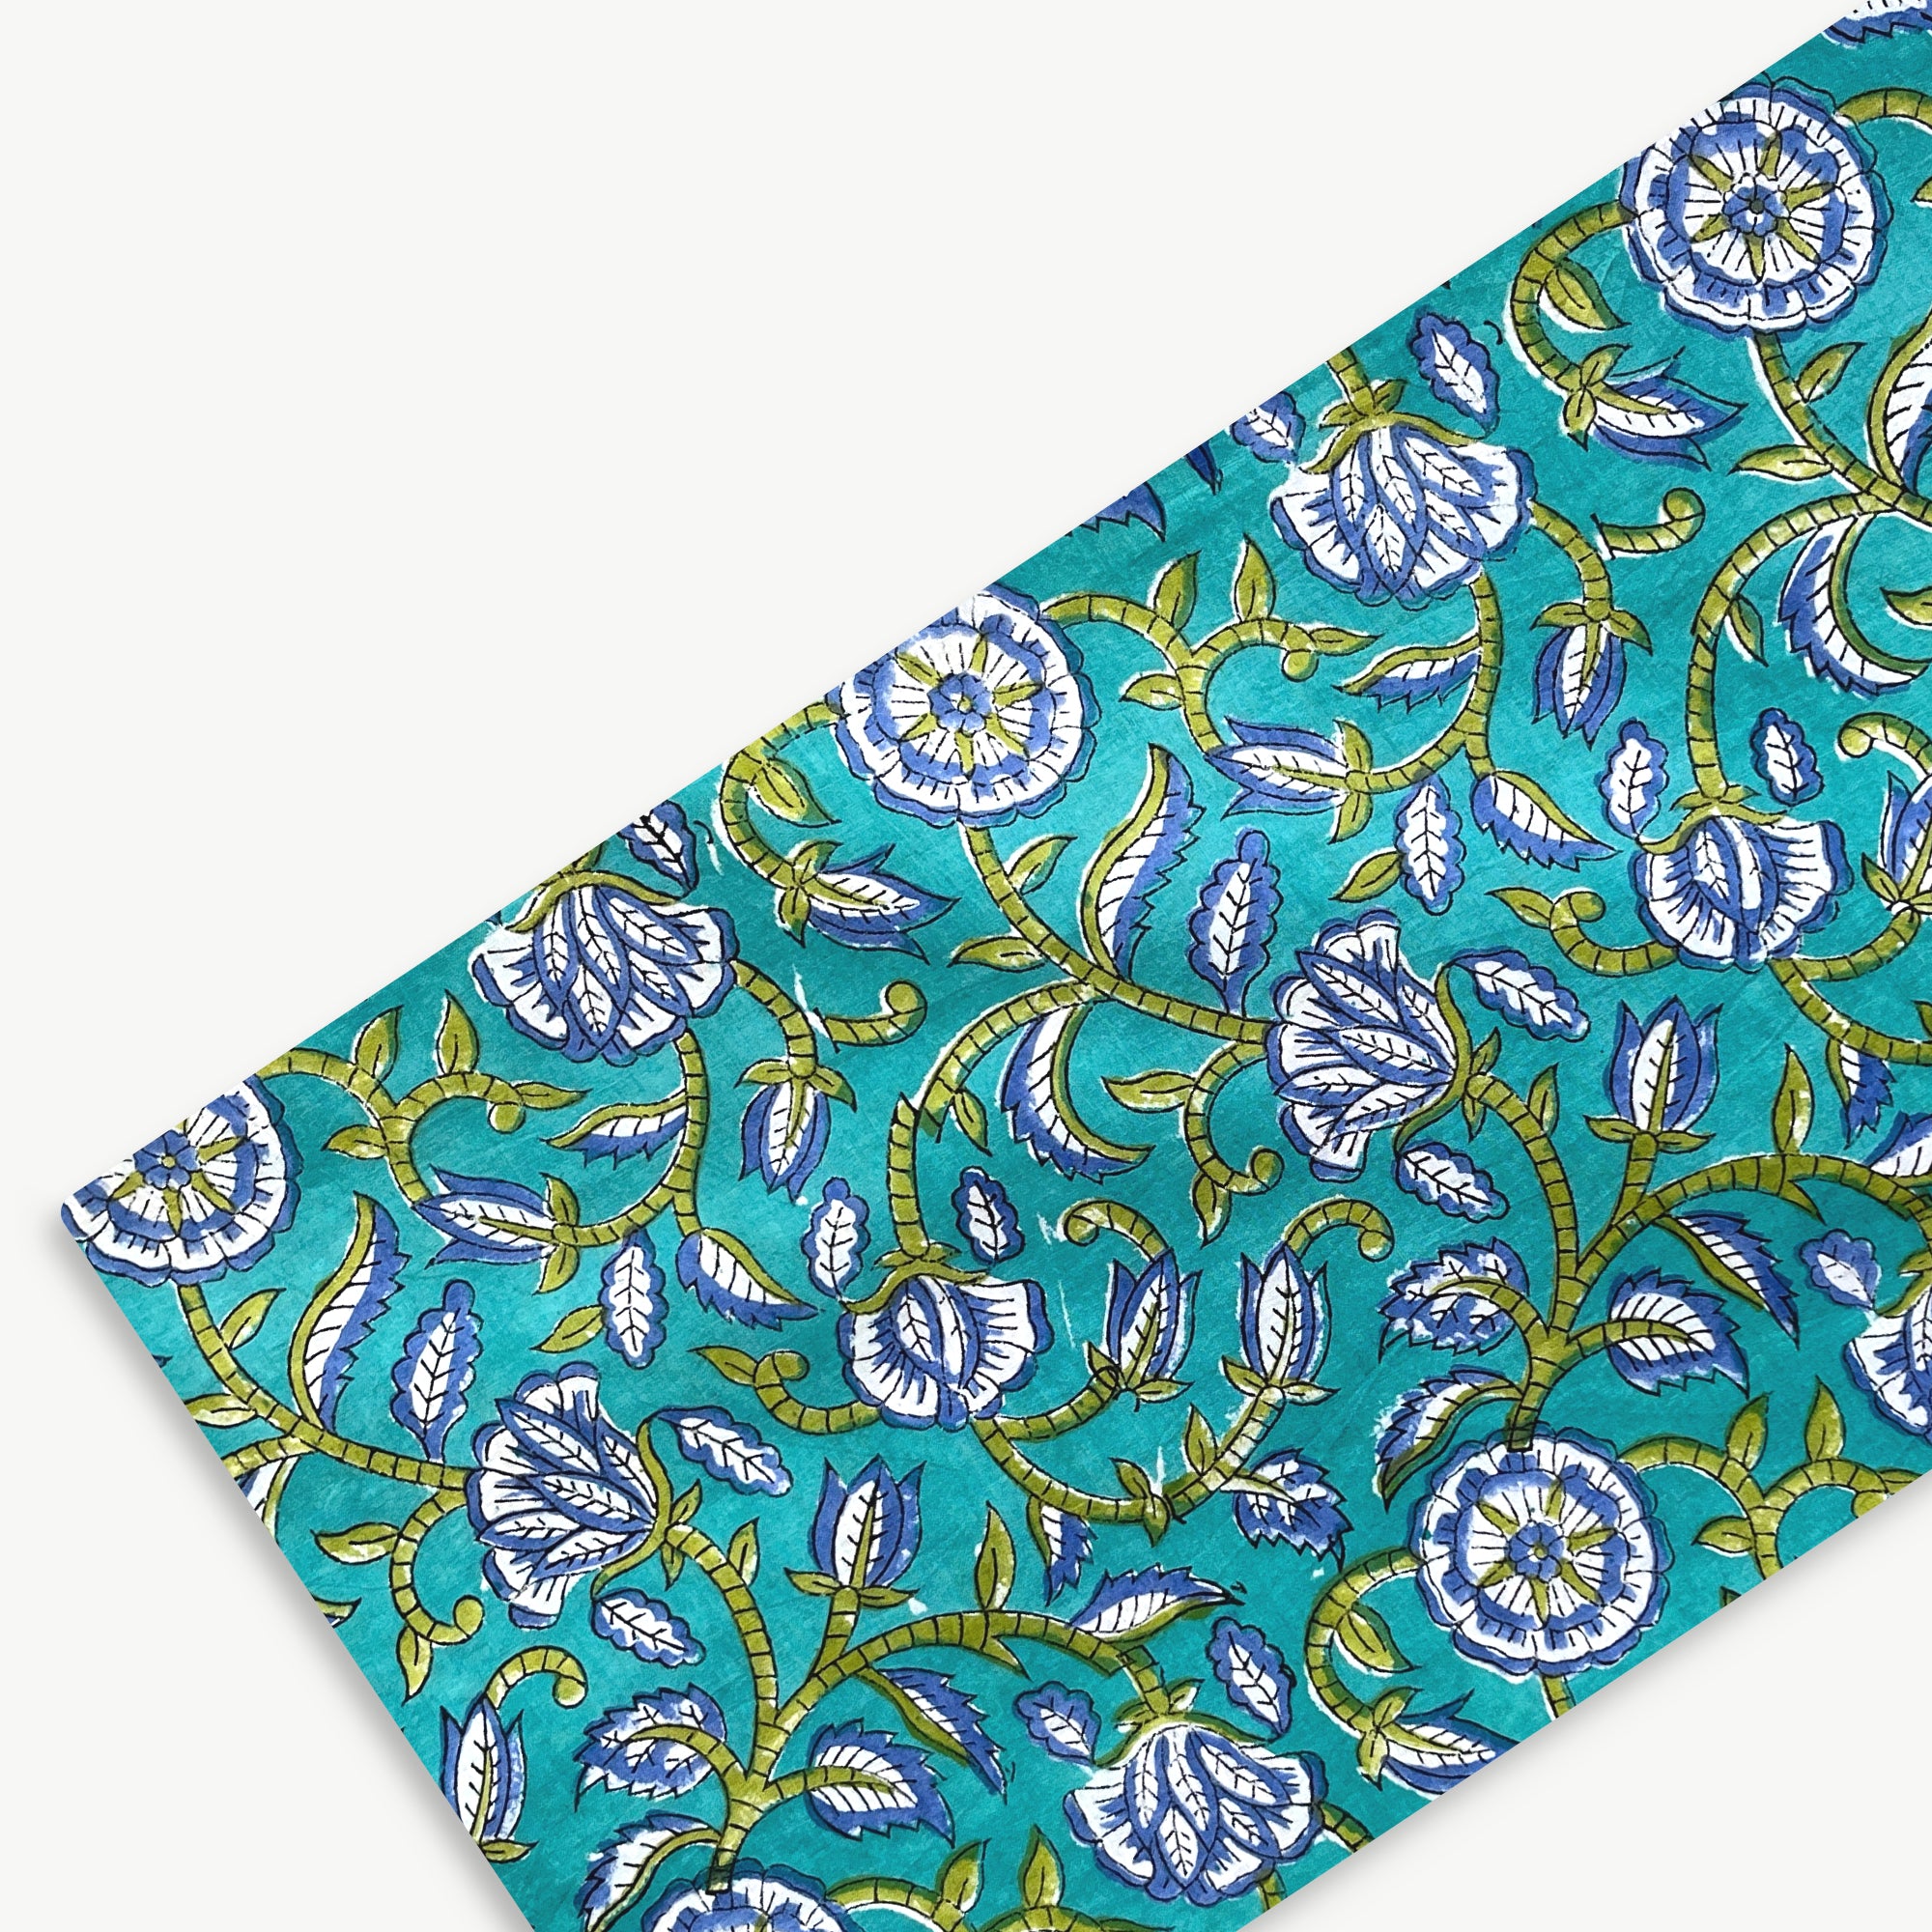 Blue Green Floral Jaal Rapid Hand Block Printed Cotton Fabric